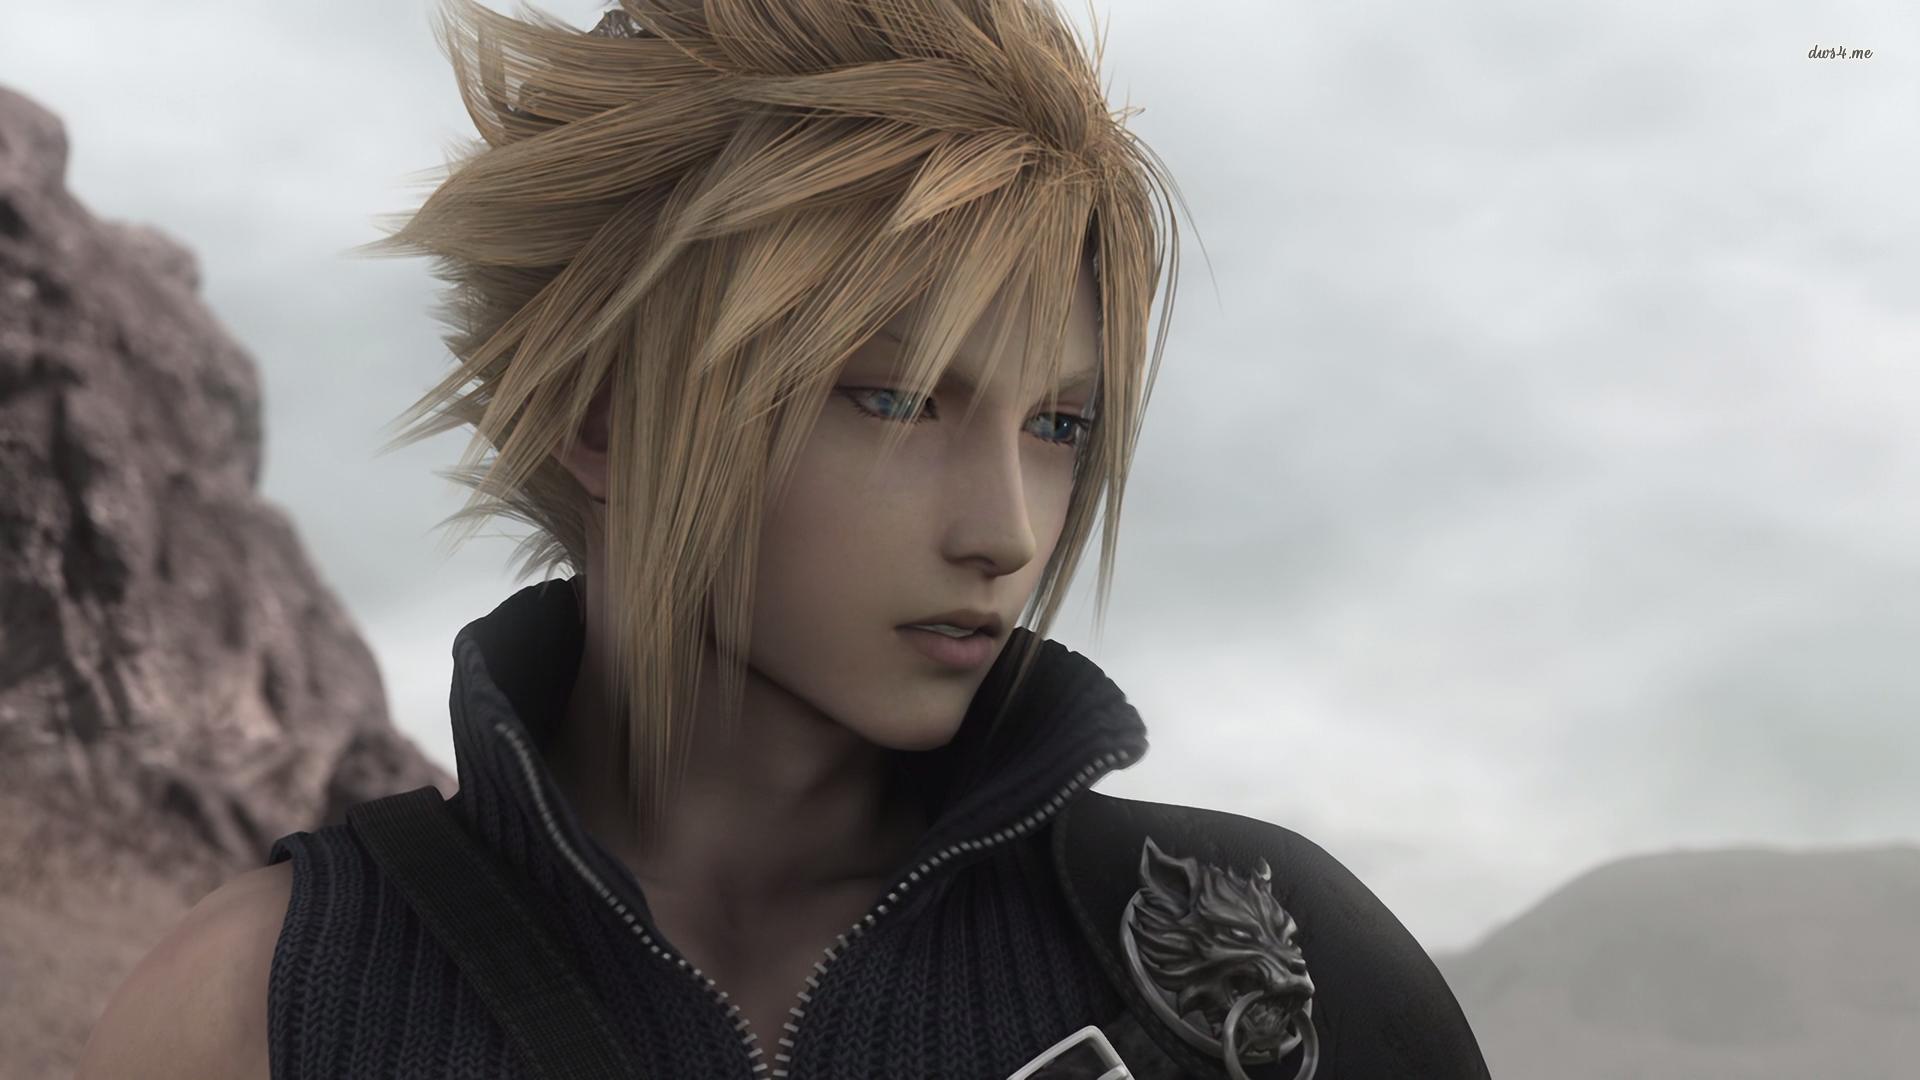 Wallpapers For > Final Fantasy 7 Advent Children Wallpapers